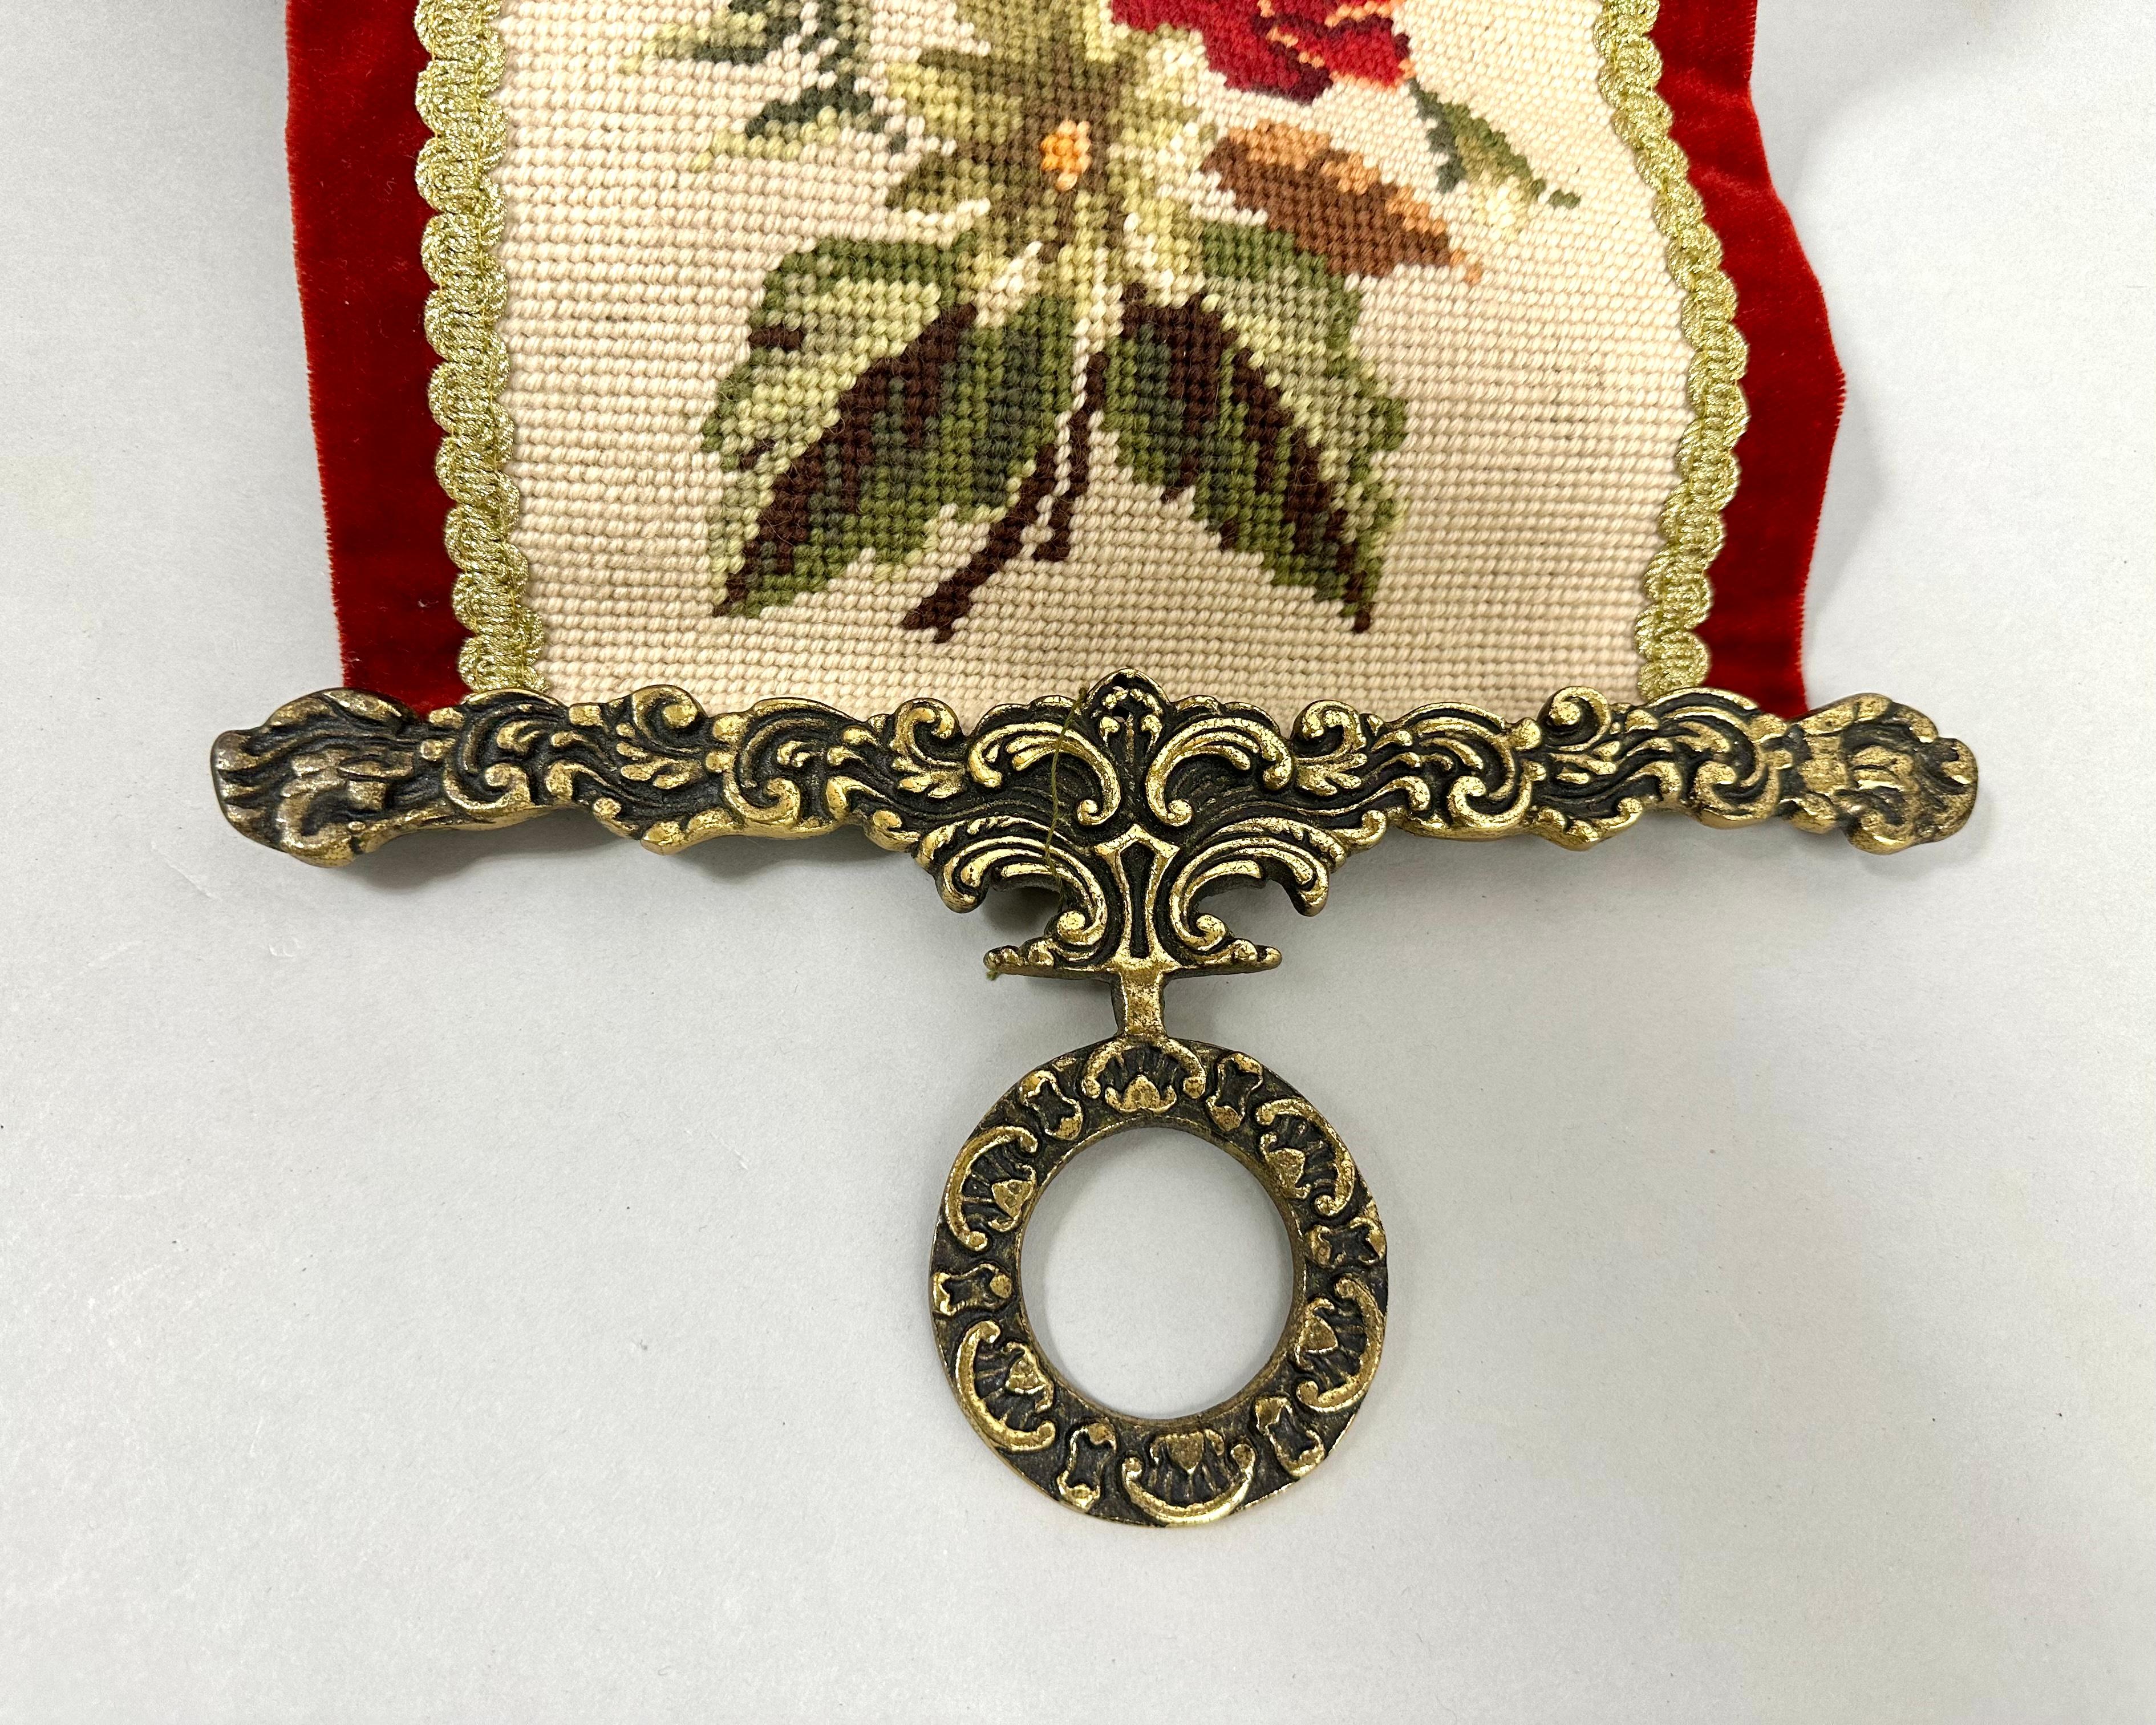 Amazing old sonnet. Bell pull - tapestry ribbon with bronze curly pendants. Embroidery - handmade tapestry.

Great story - the flowers look amazing. The reverse side is red velvet.

Sonnet (from French sonnette bell, bell) - an outdated name, a room